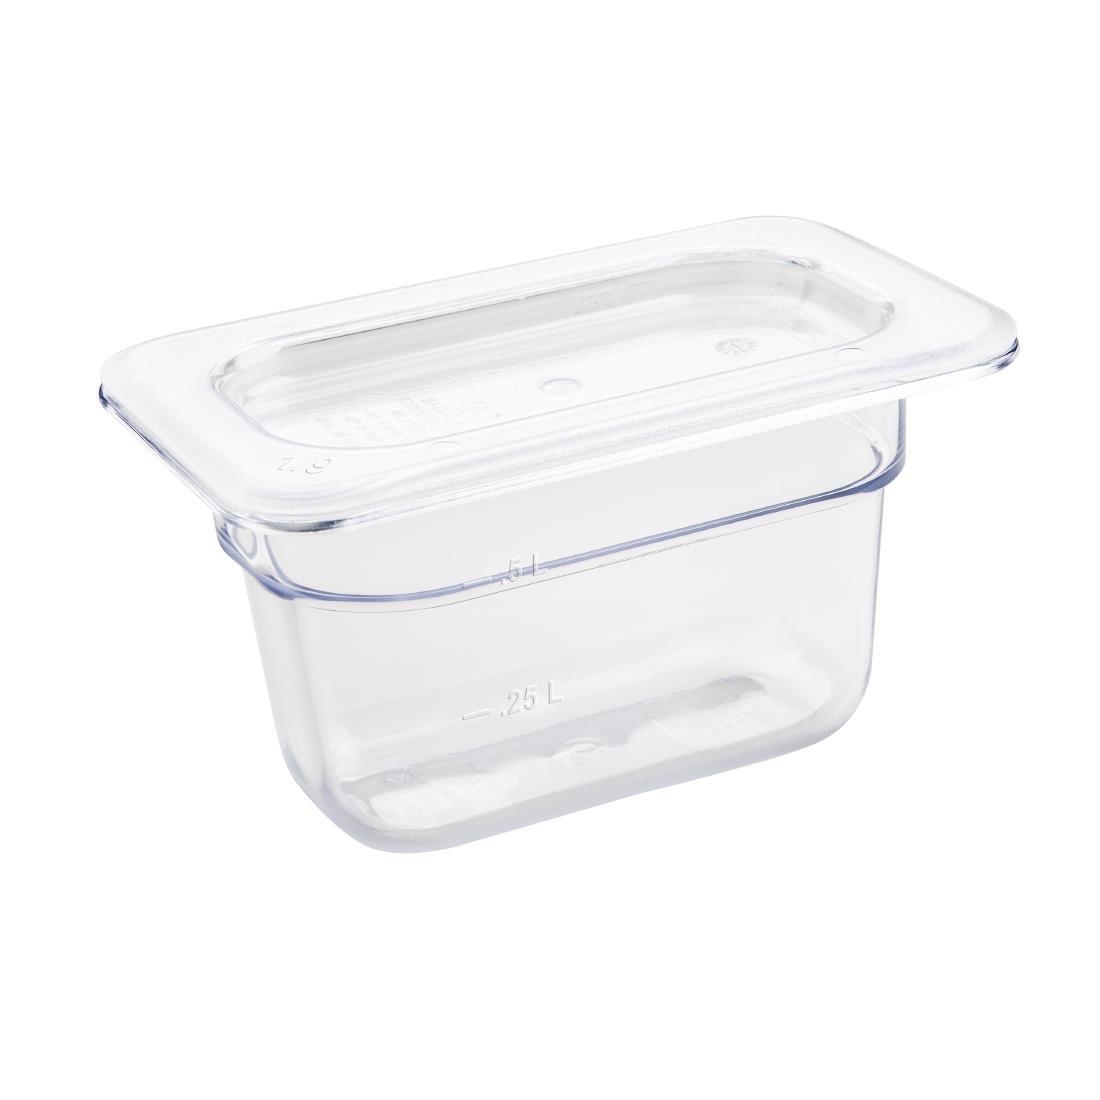 Vogue Polycarbonate 1/9 Gastronorm Container 100mm Clear - U243  - 2